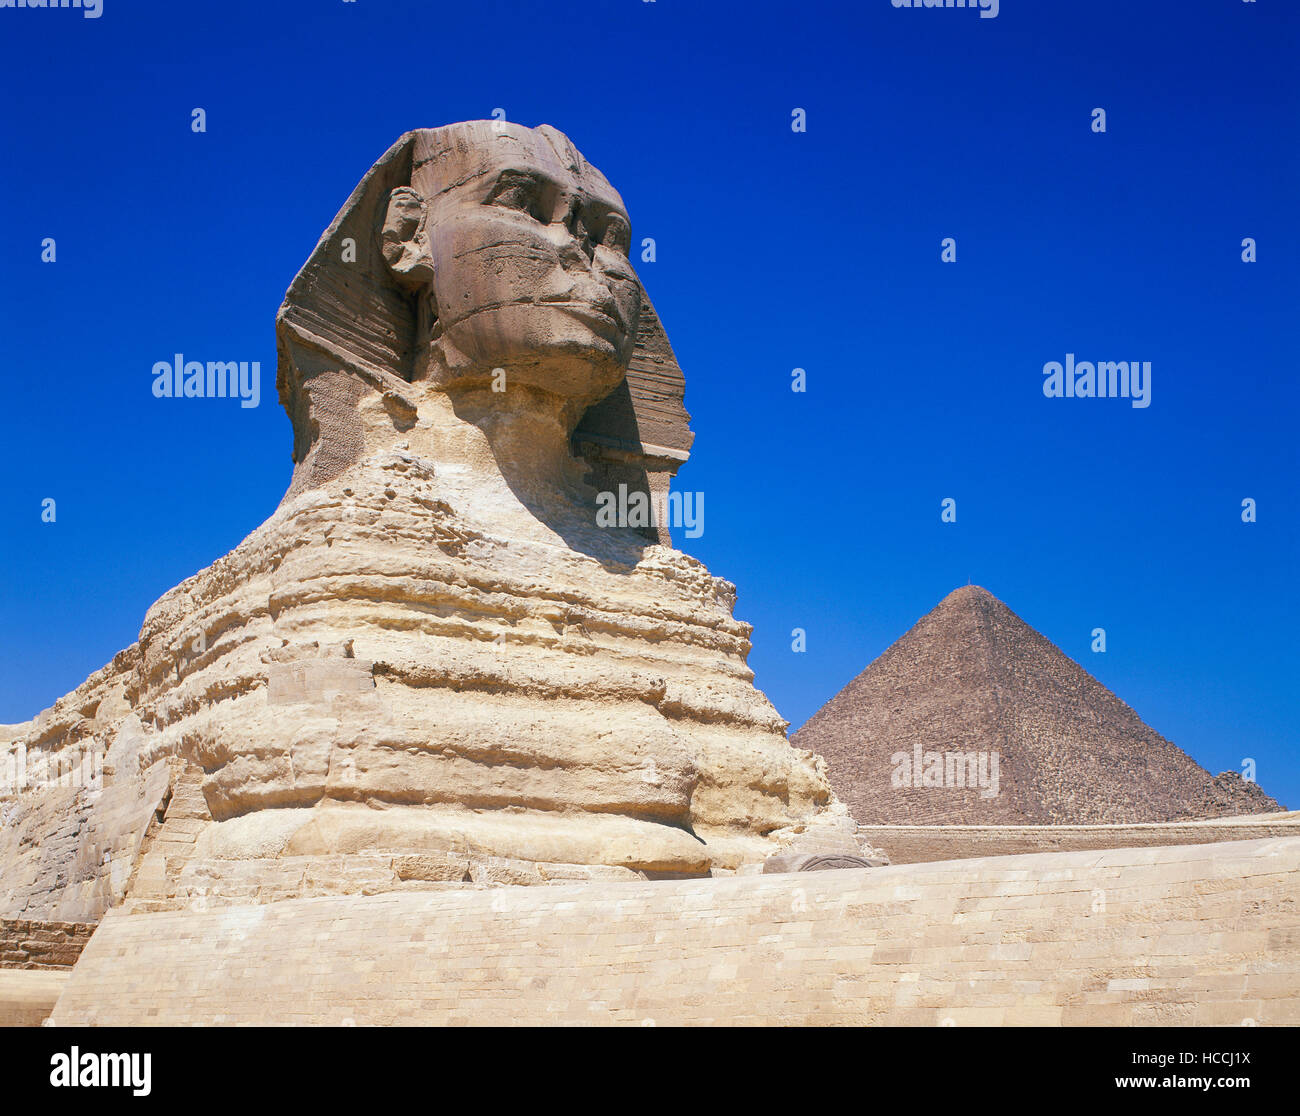 The Sphinx and Pyramid on the Giza plateau, Cairo, Egypt Stock Photo